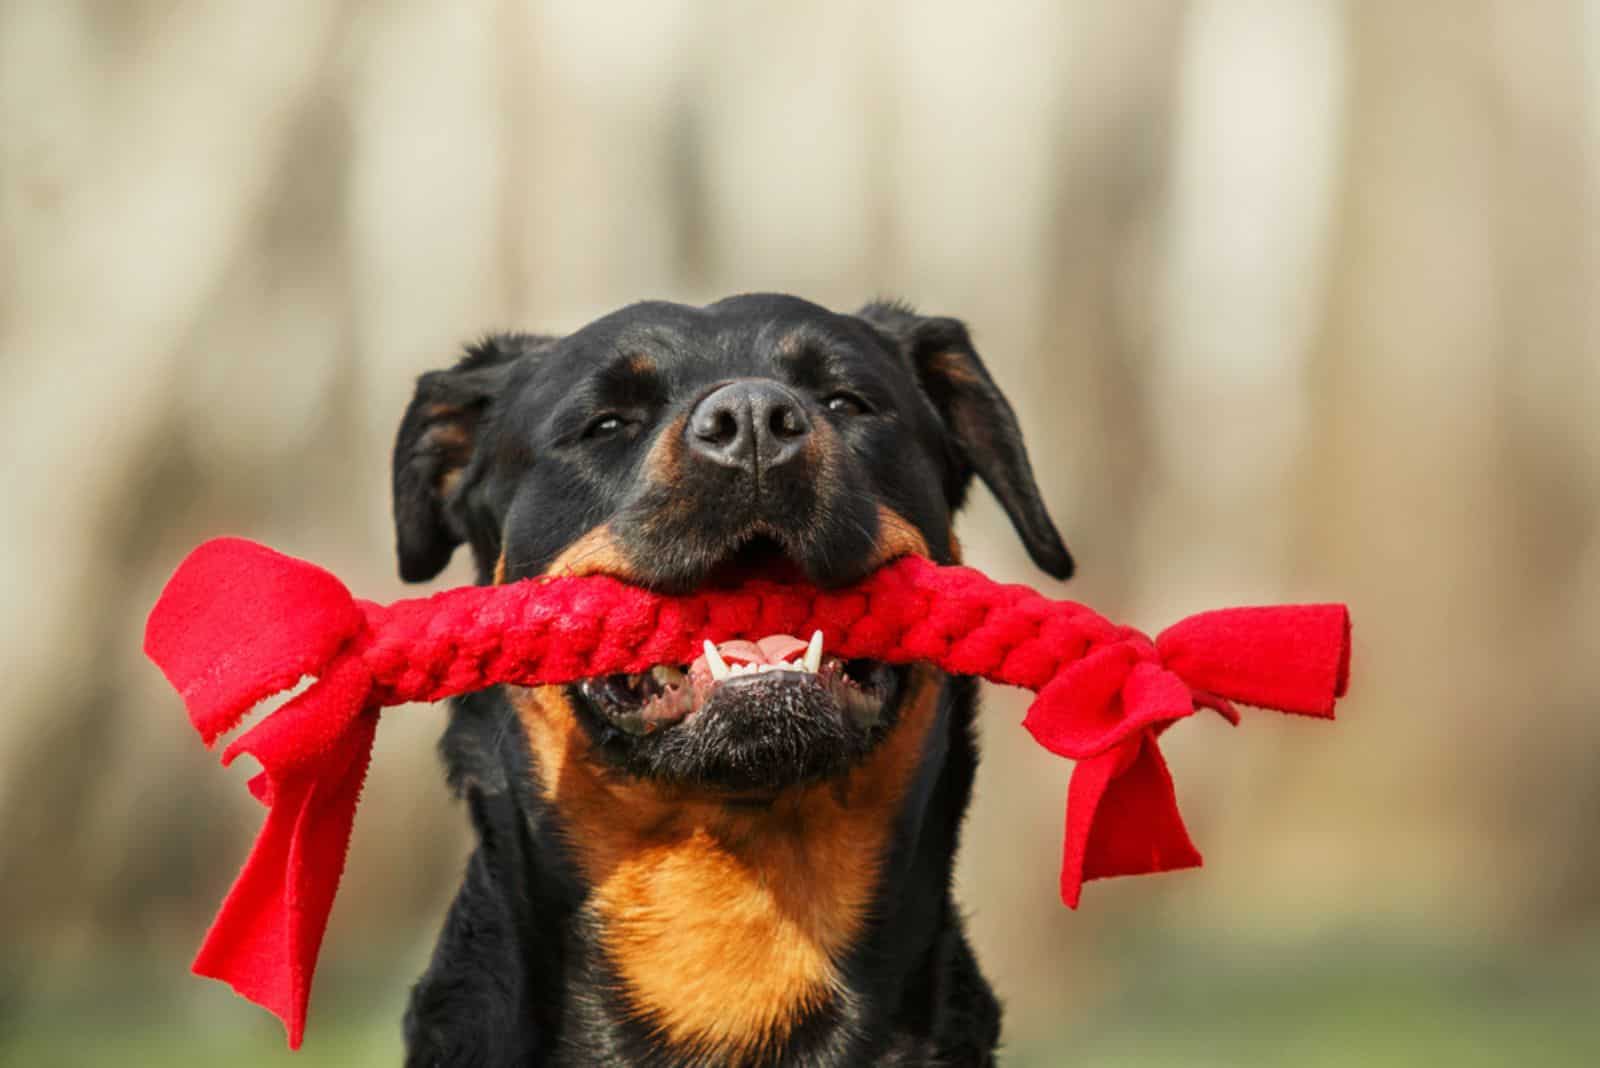 Beautiful Rottweiler dog breed with red toy